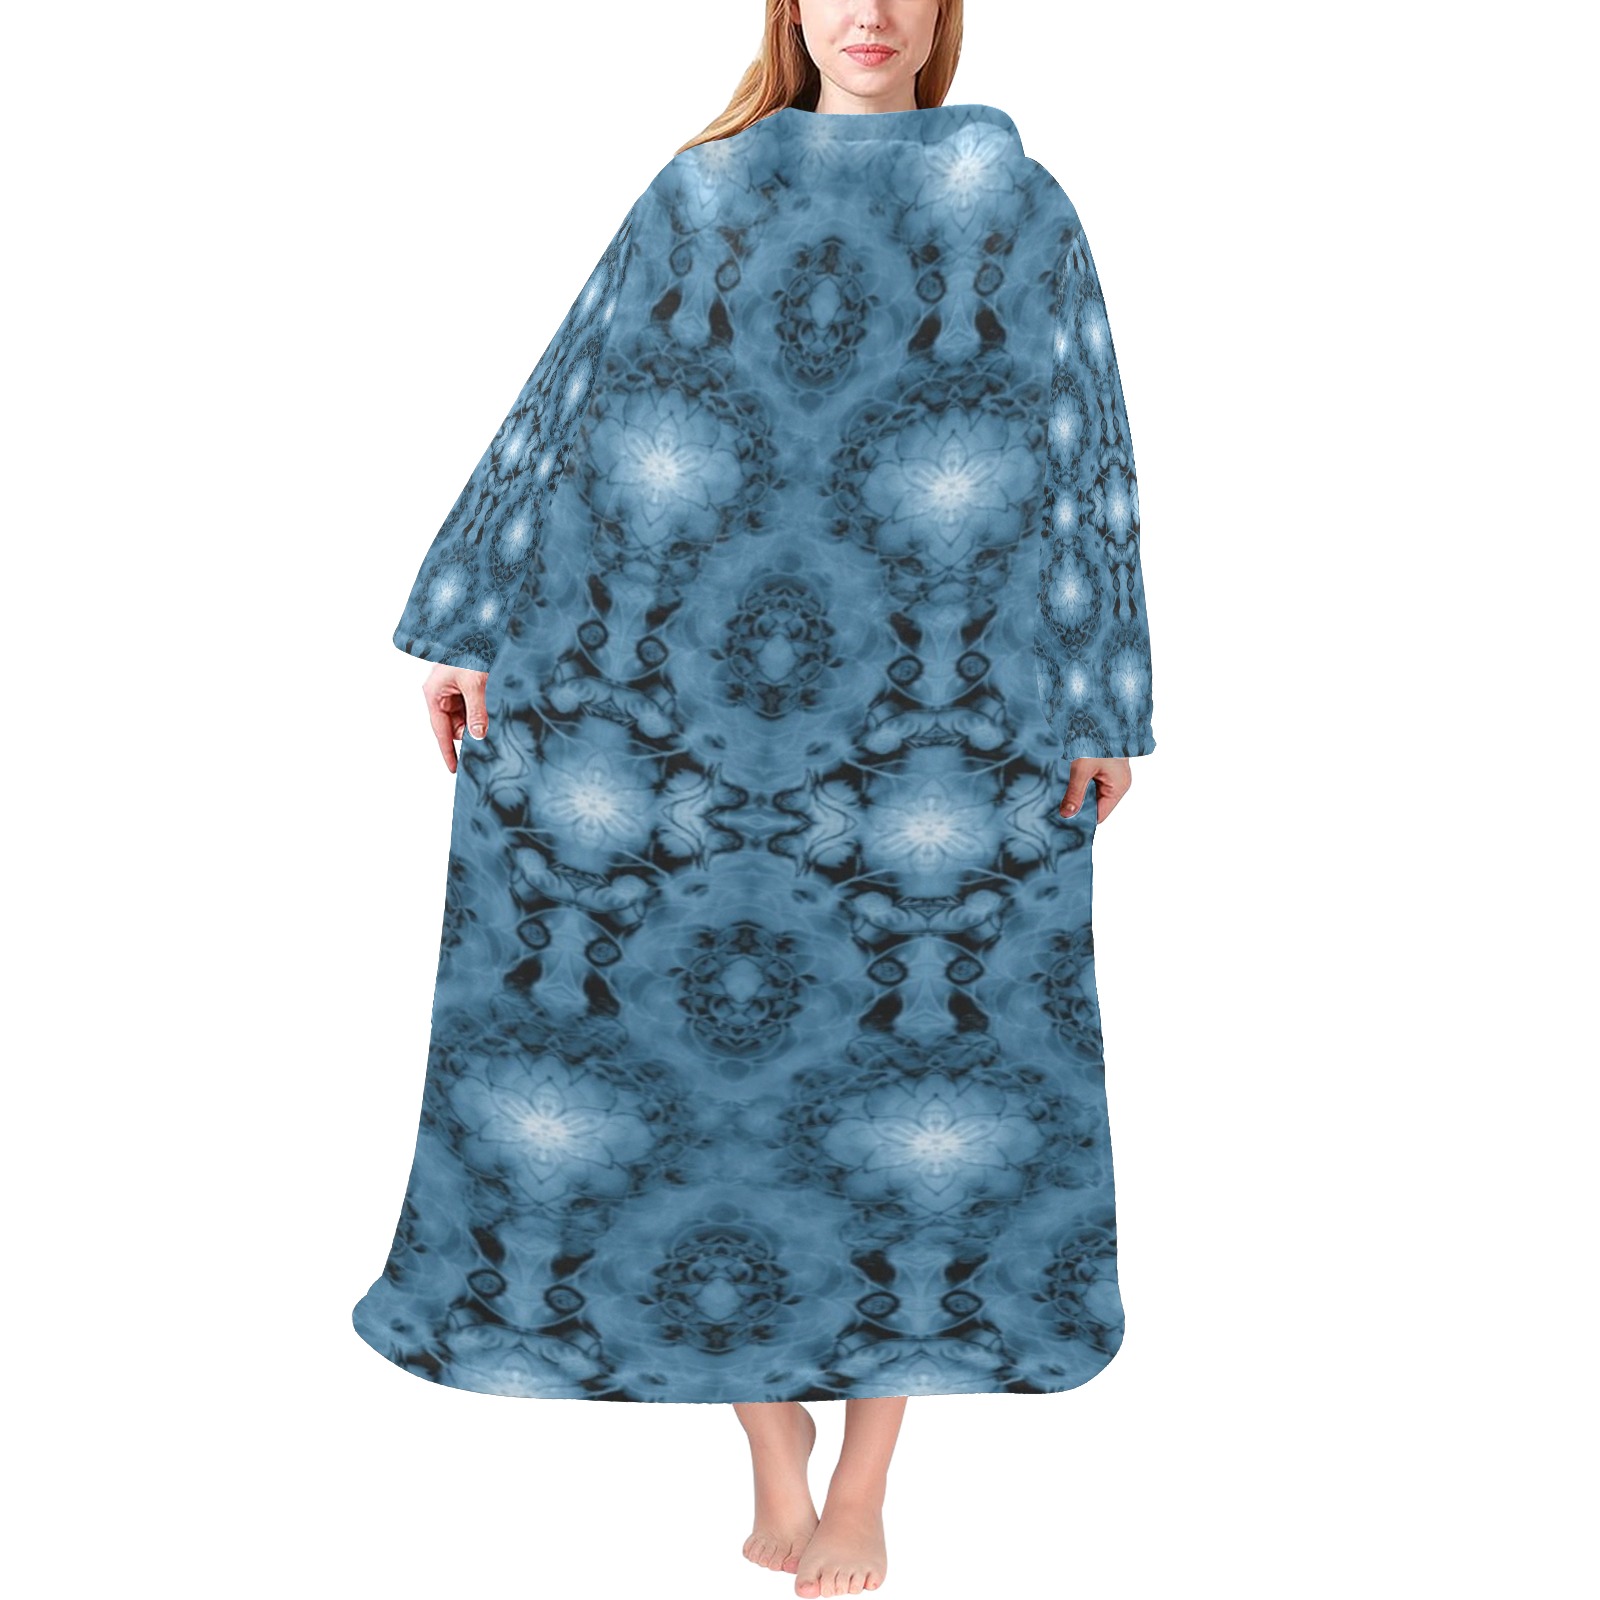 Nidhi decembre 2014-pattern 7-44x55 inches-blue Blanket Robe with Sleeves for Adults